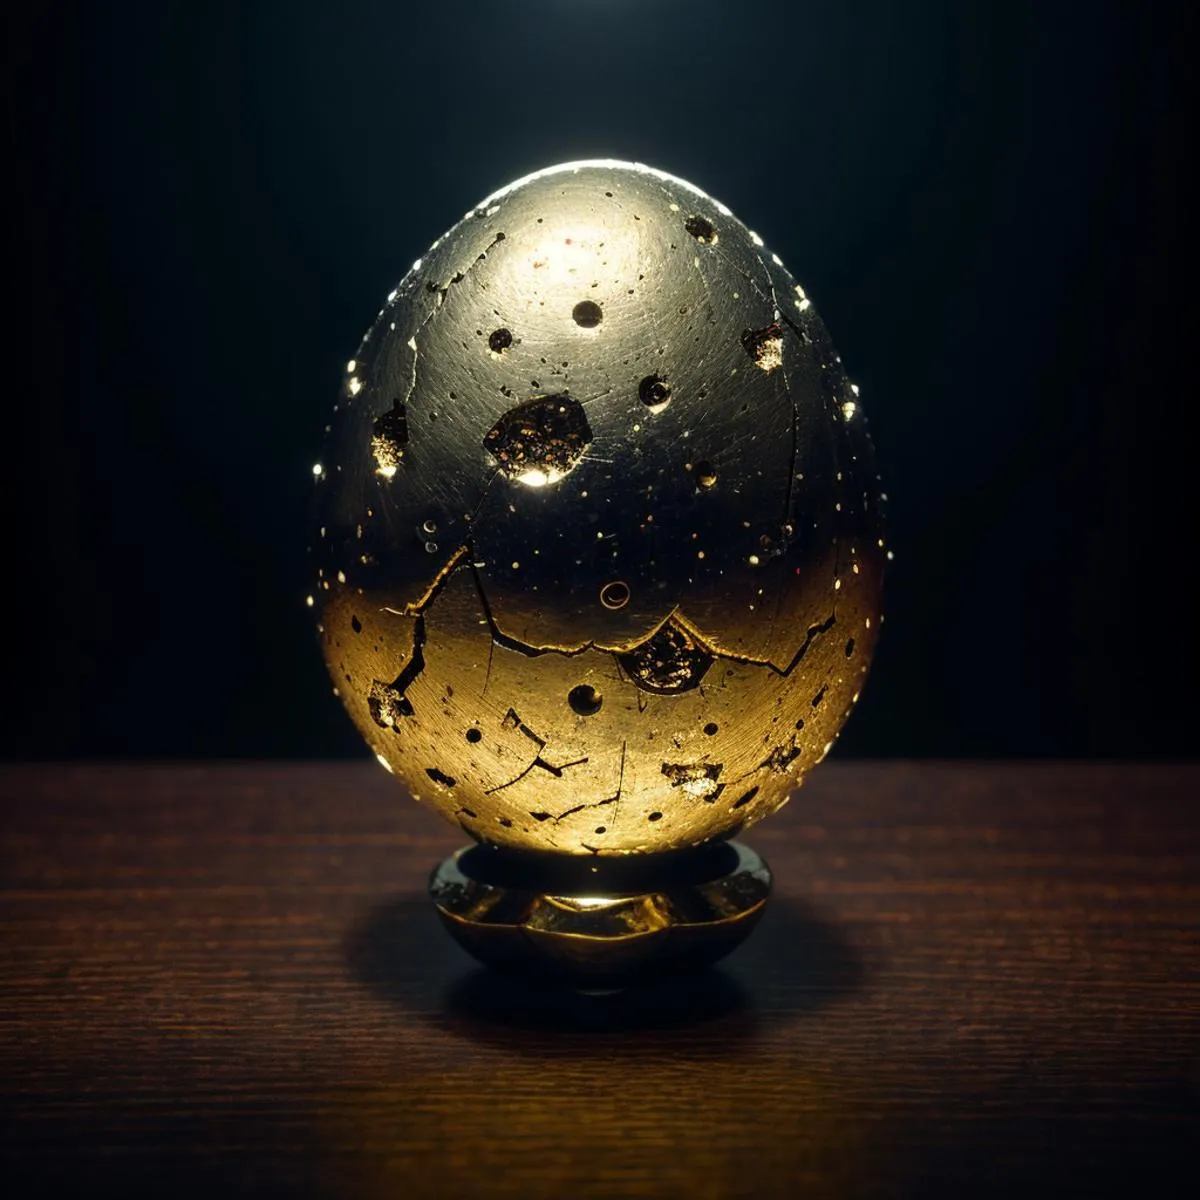 Beautifully rendered AI image using Stable Diffusion, featuring a golden egg with cracks and holes, illuminated with soft glowing light, placed on a pedestal against a dark background.